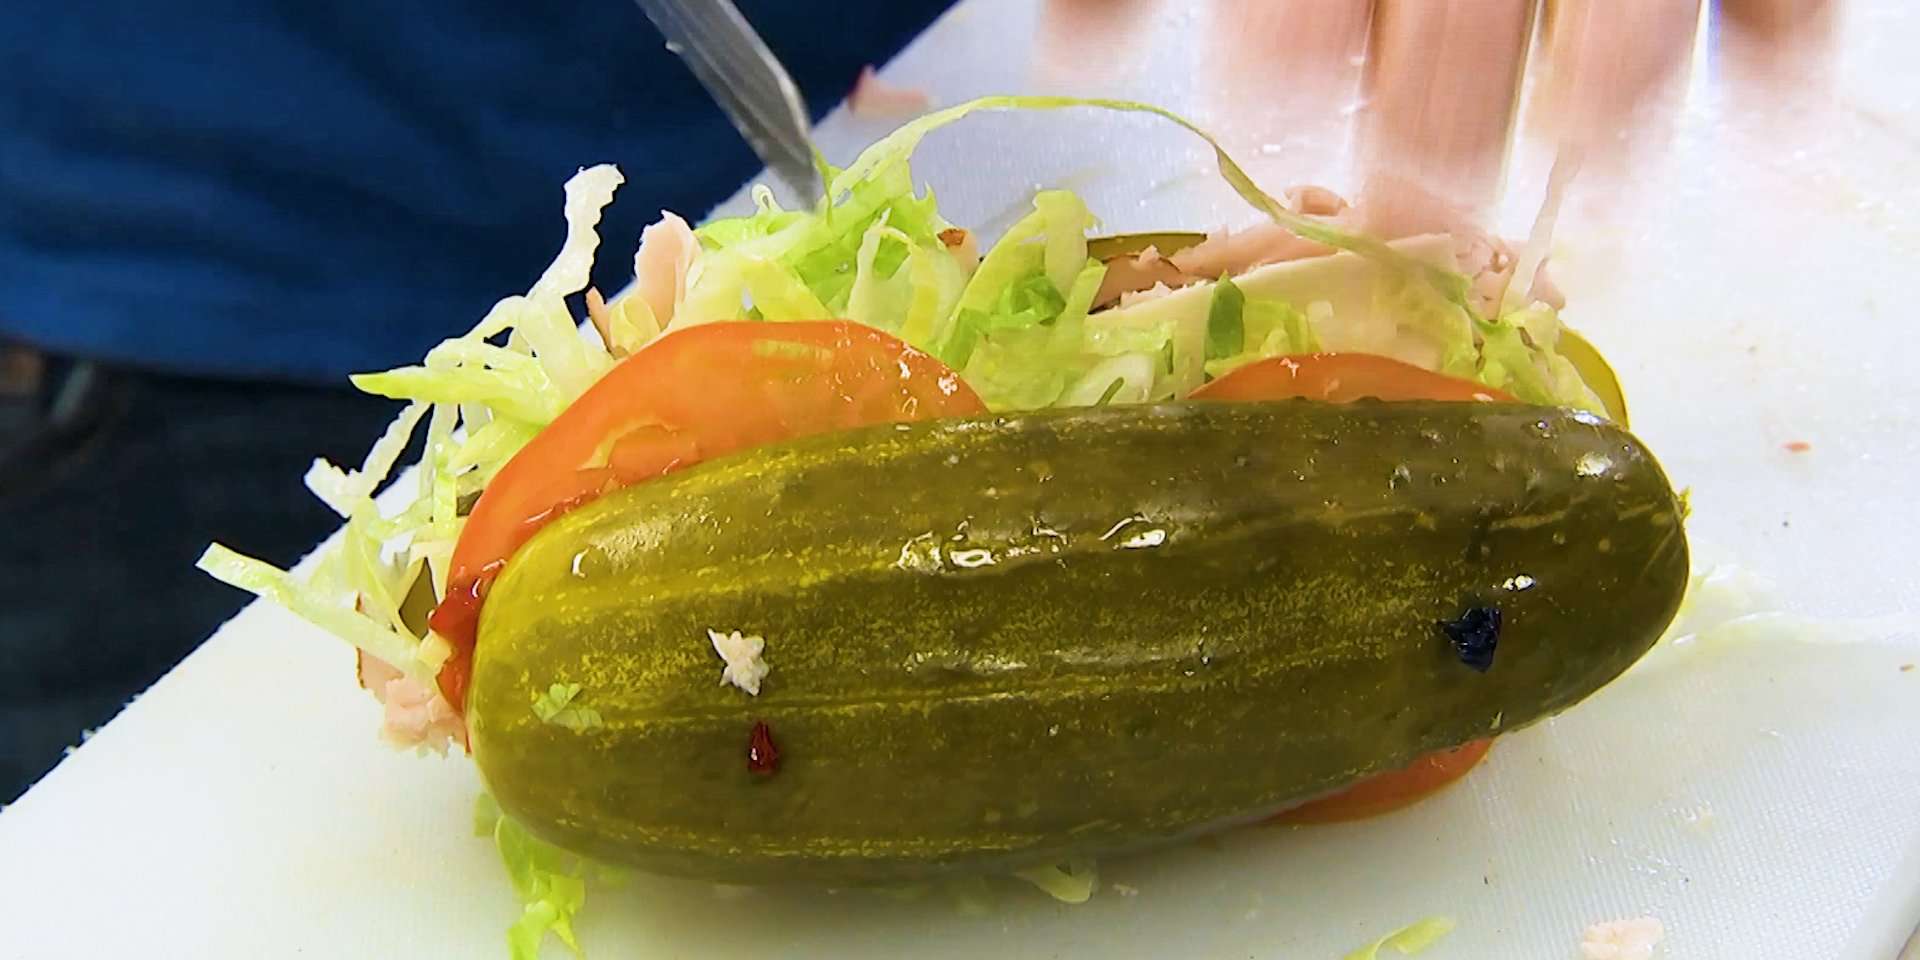 Taboola Ad Example 54741 - A Restaurant In New Jersey Makes Sandwiches With Pickles Instead Of Bread